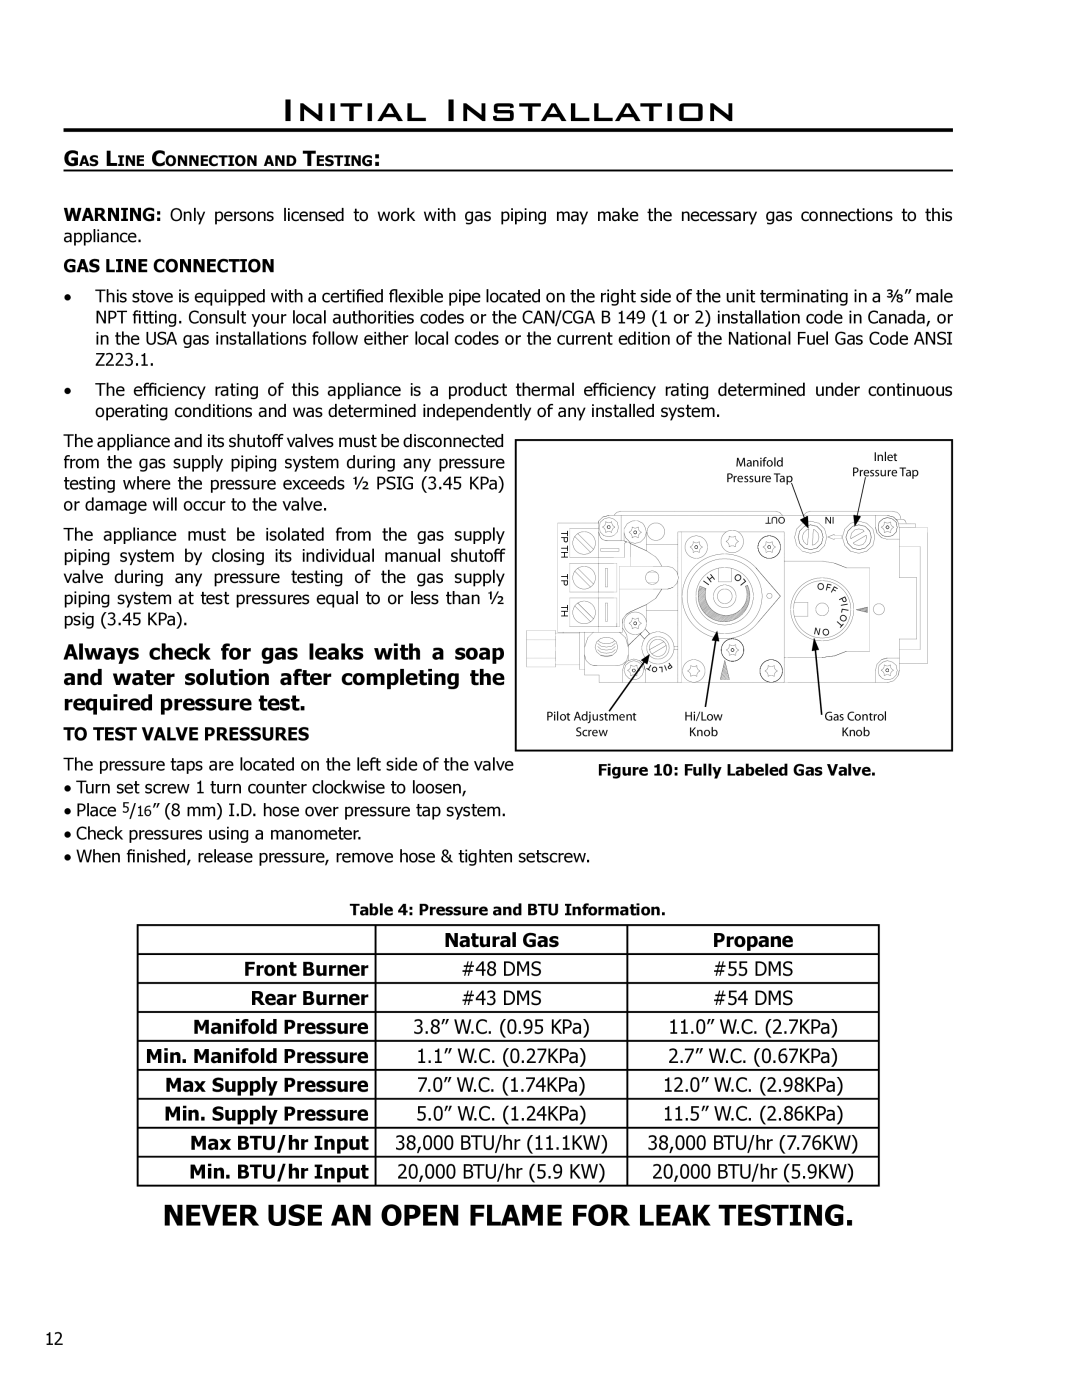 Enviro EG40-071 owner manual GAS Line Connection, To Test Valve Pressures 